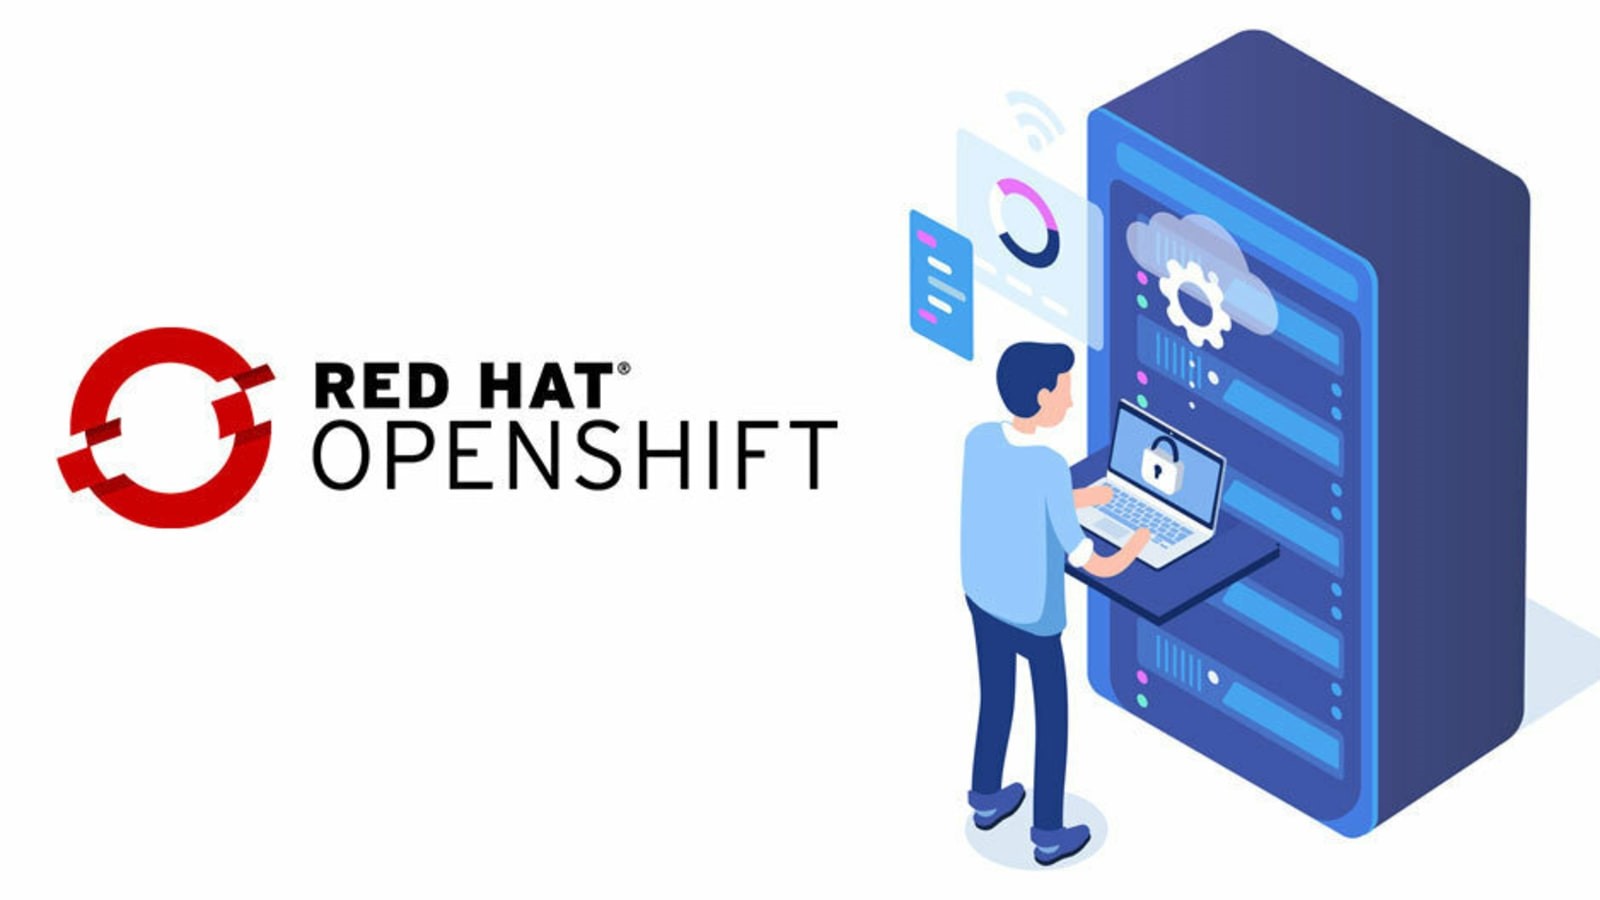 Red Hat OpenShift on Power 10